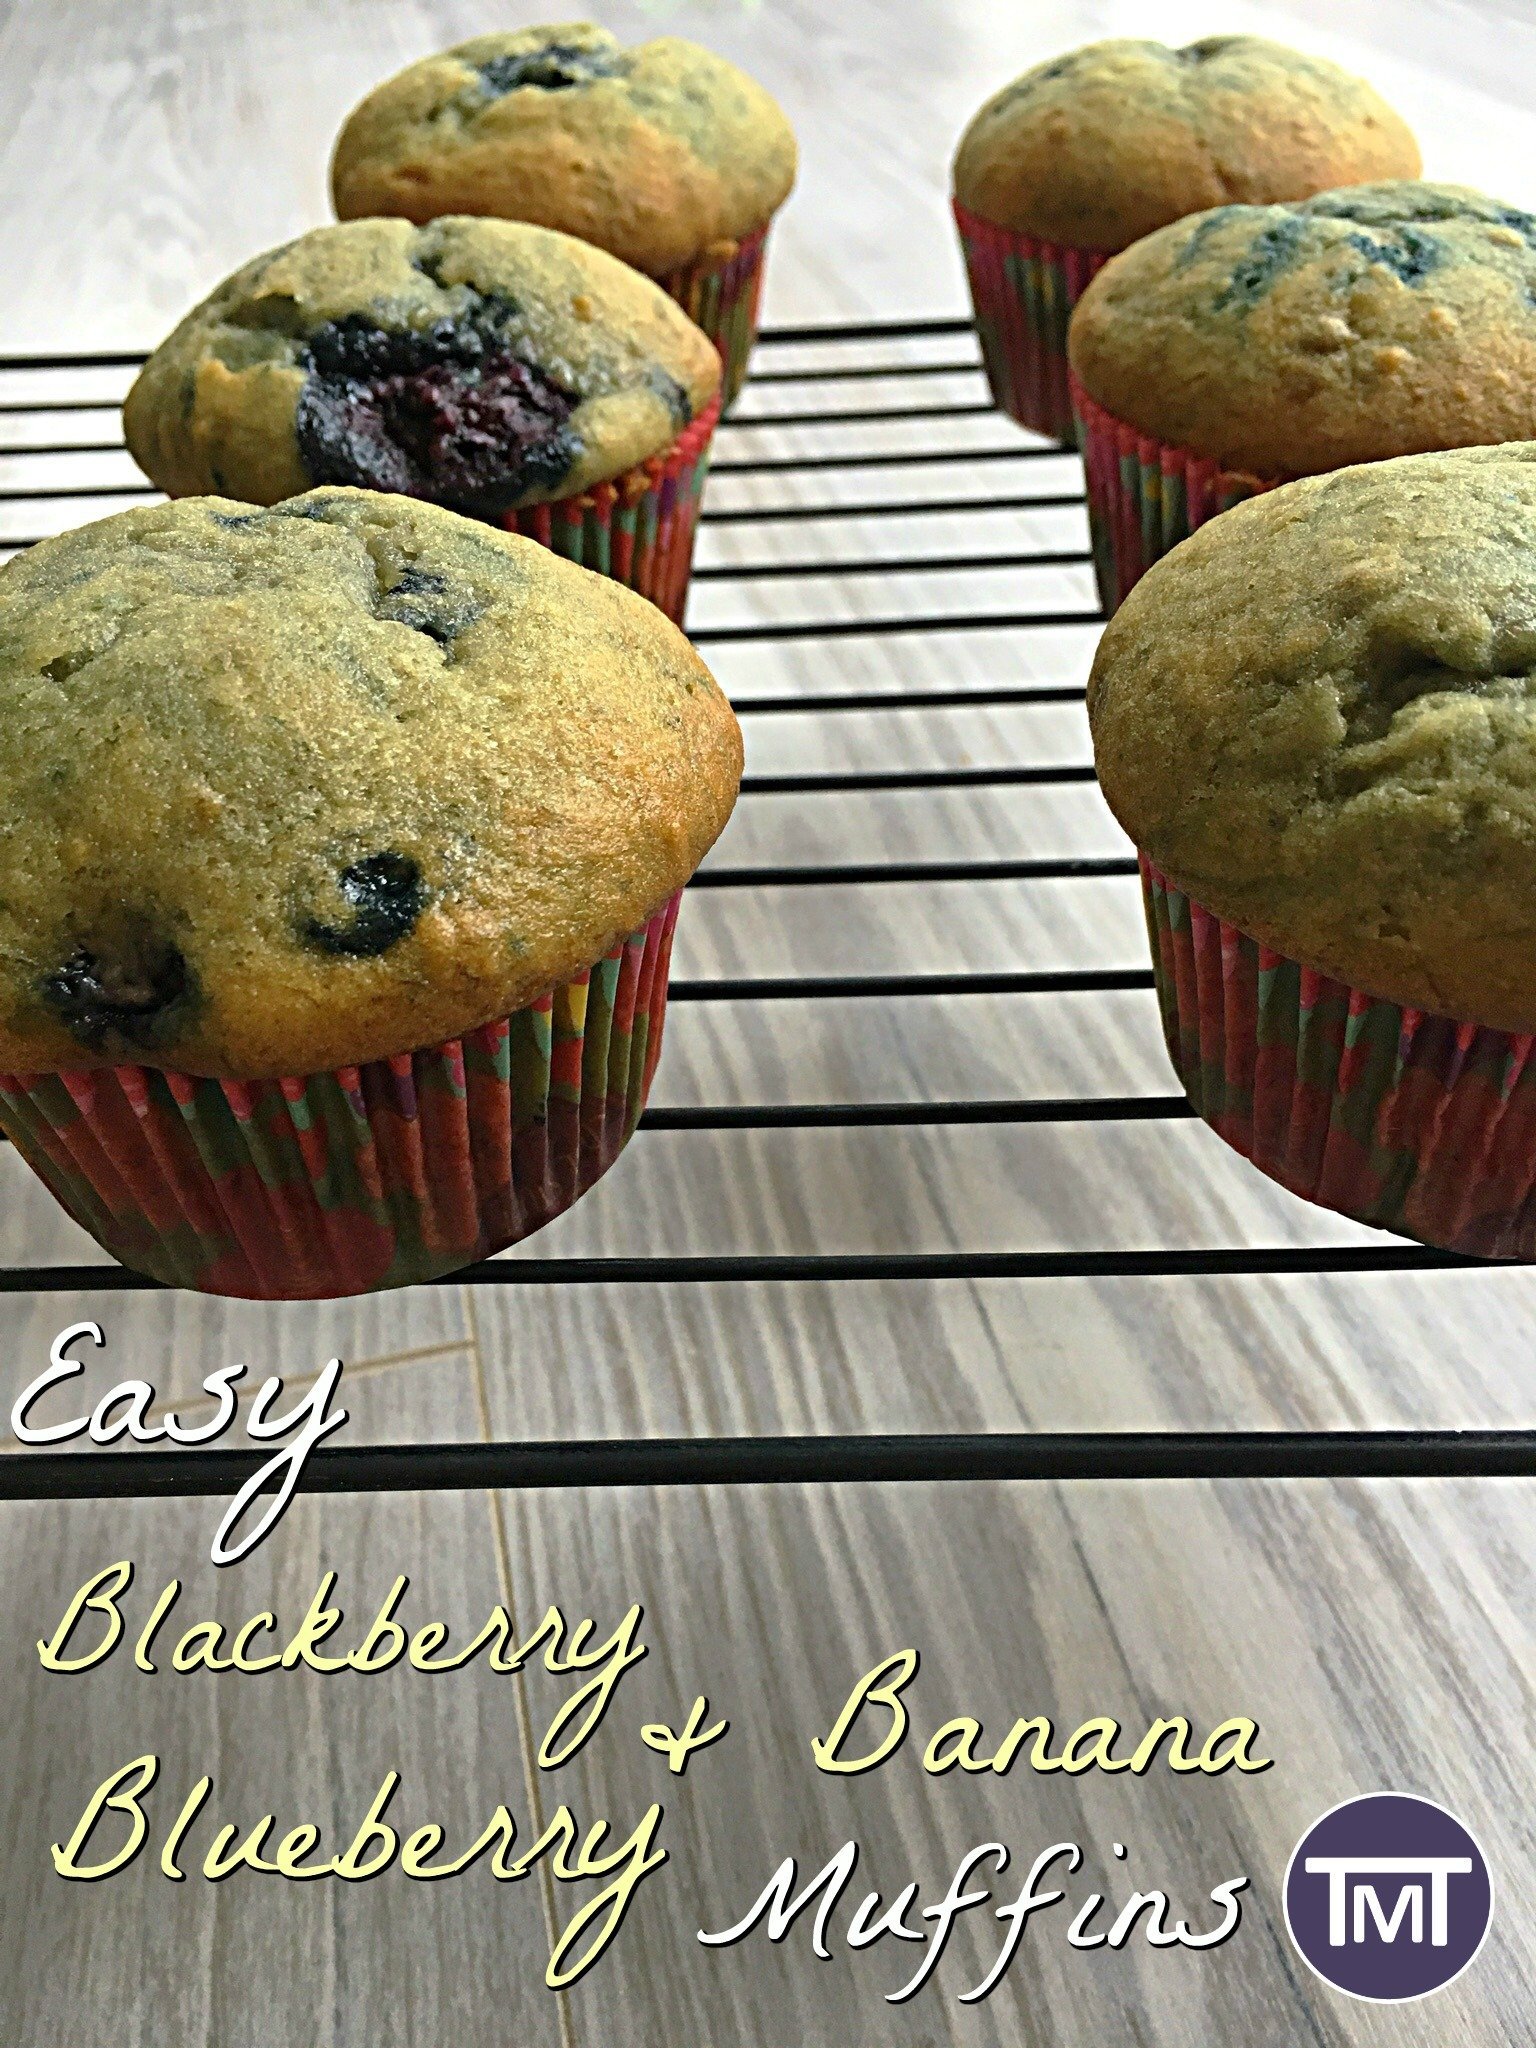 I have been experimenting with fruit in baking and these easy blackberry, blueberry & Banana muffins have turned out really nicely!